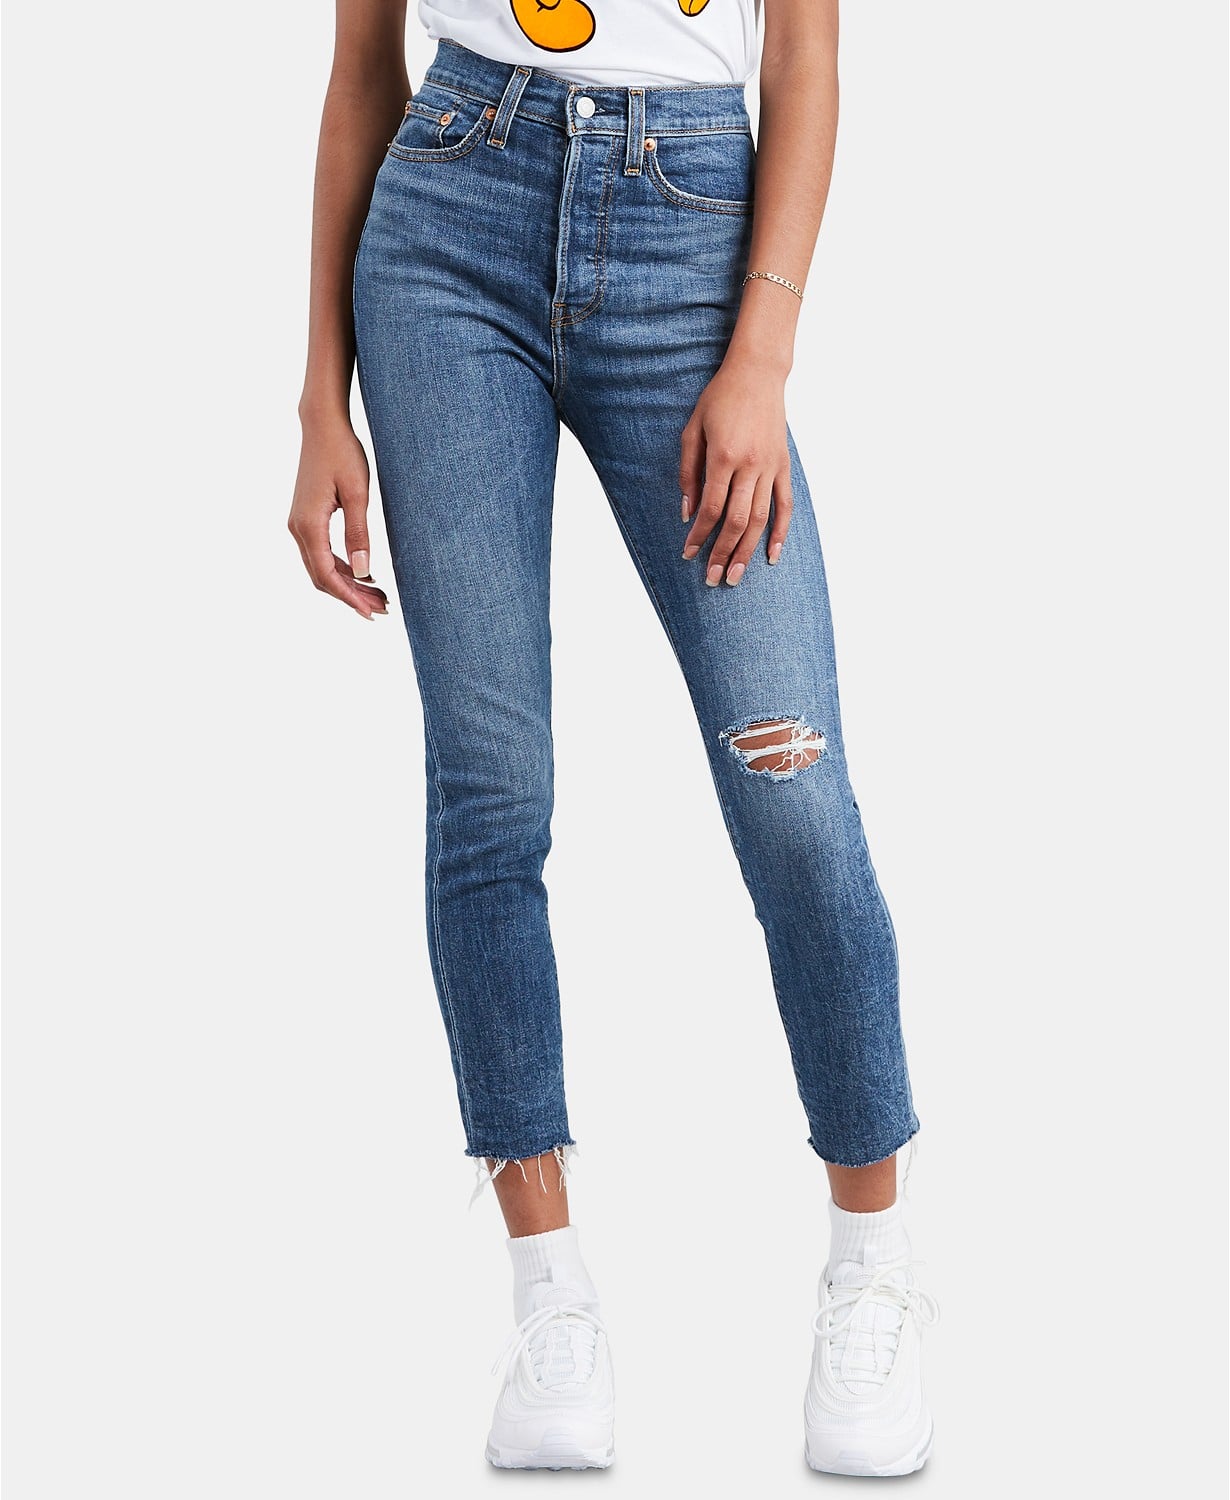 Levi's Ripped Skinny Wedgie Jeans | The 